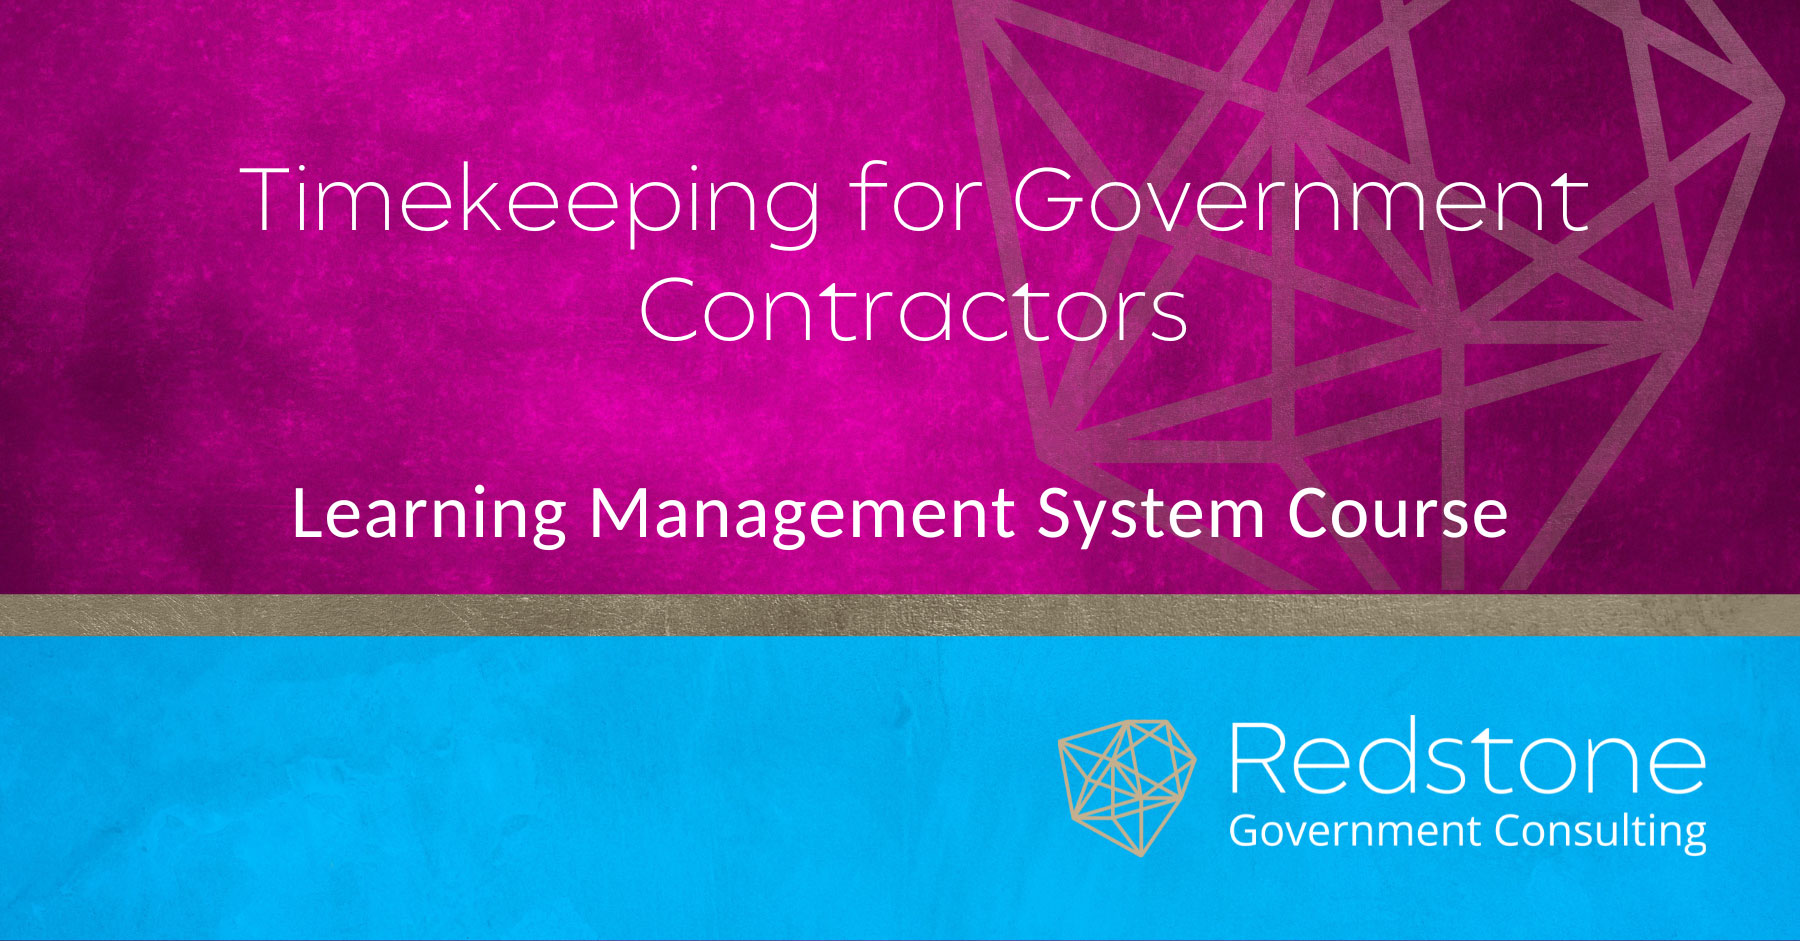 RGCI LMS Timekeeping for Government Contractors